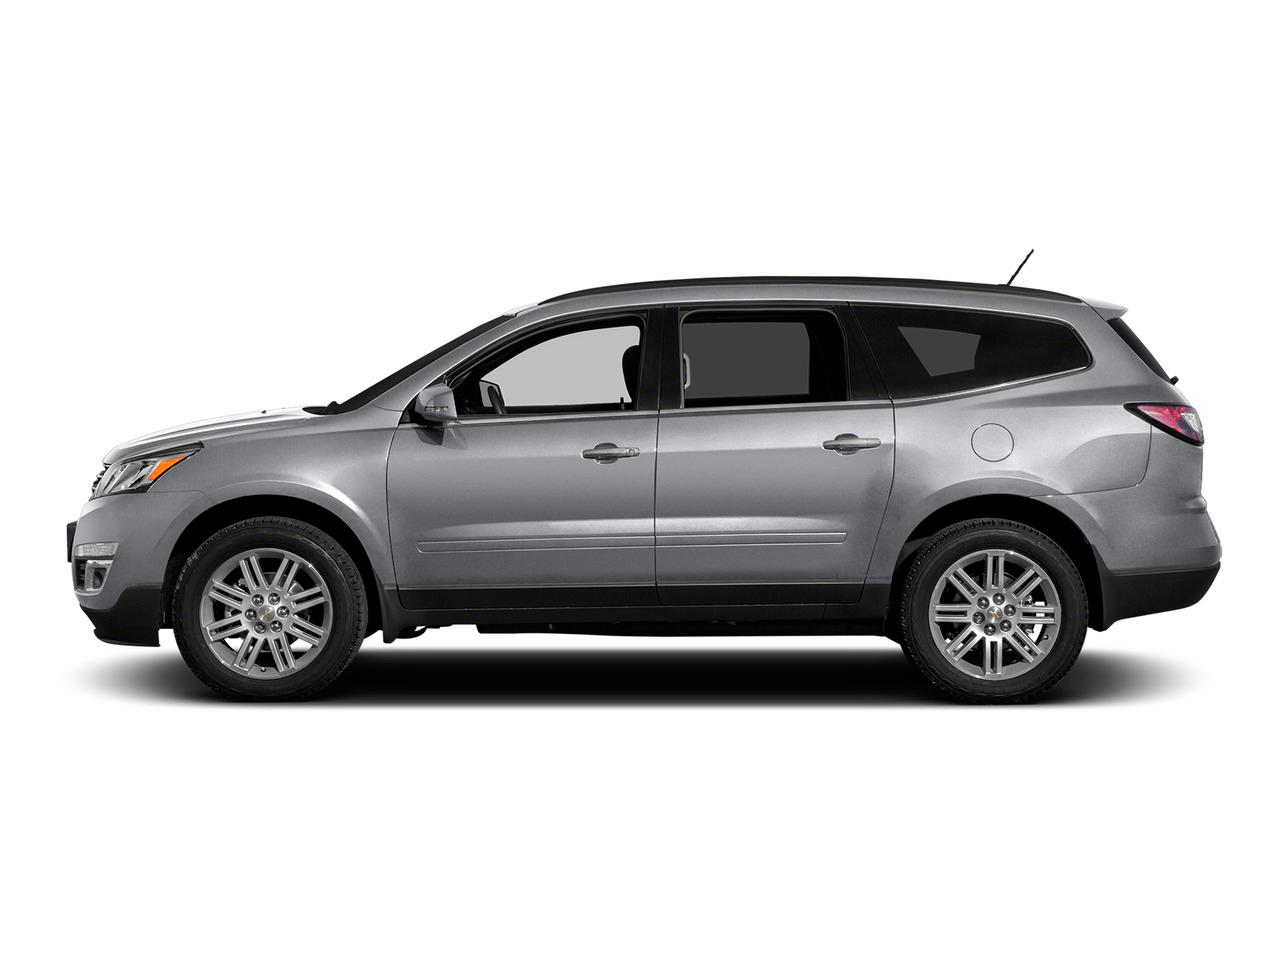 Used 2015 Chevrolet Traverse 2LT with VIN 1GNKVHKD4FJ343820 for sale in Republic, MO